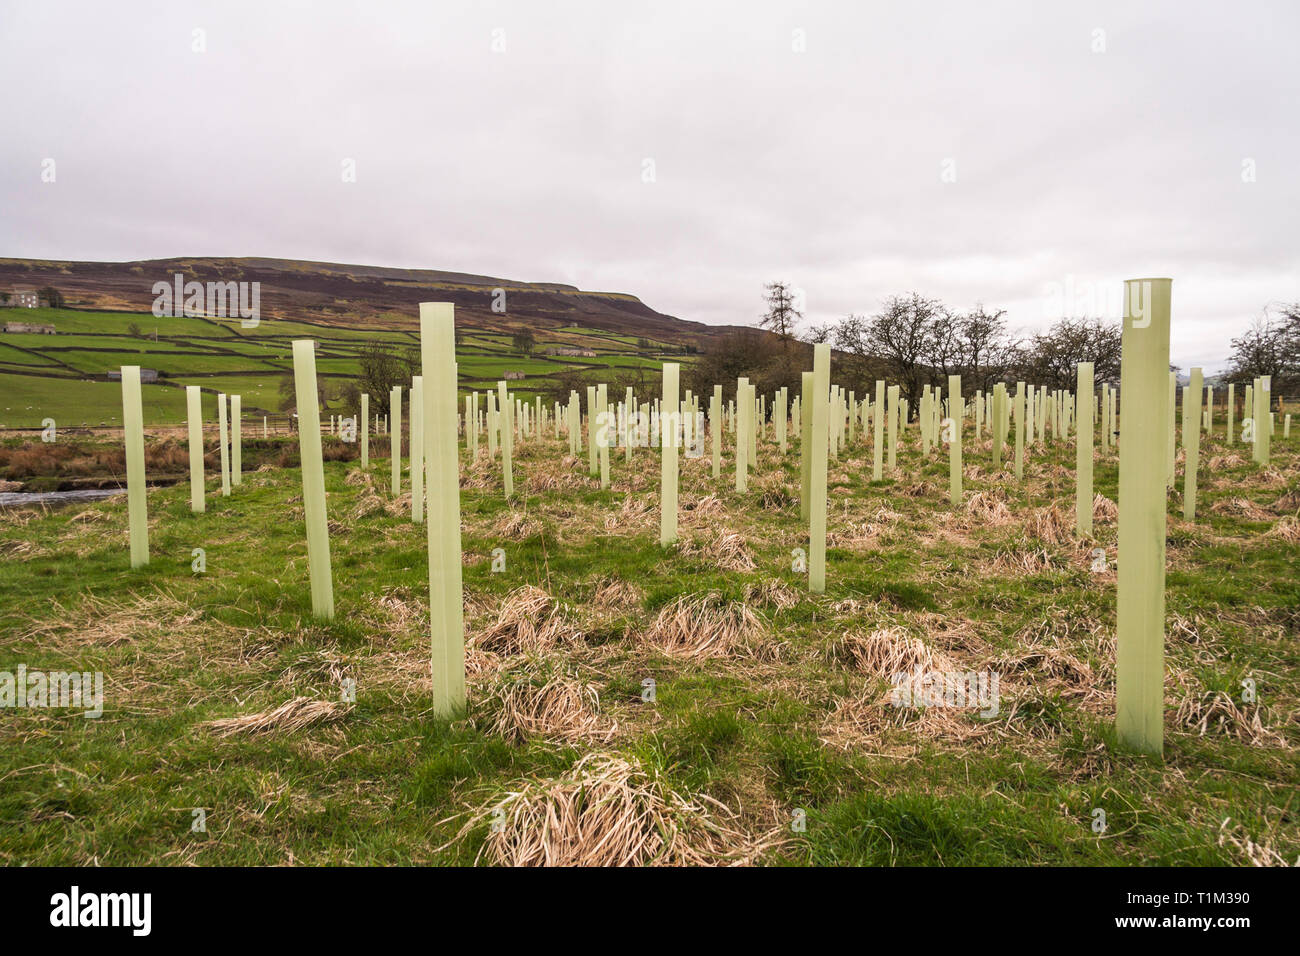 View of the tree planting scheme at Reeth,North Yorkshire,England,UK Stock Photo